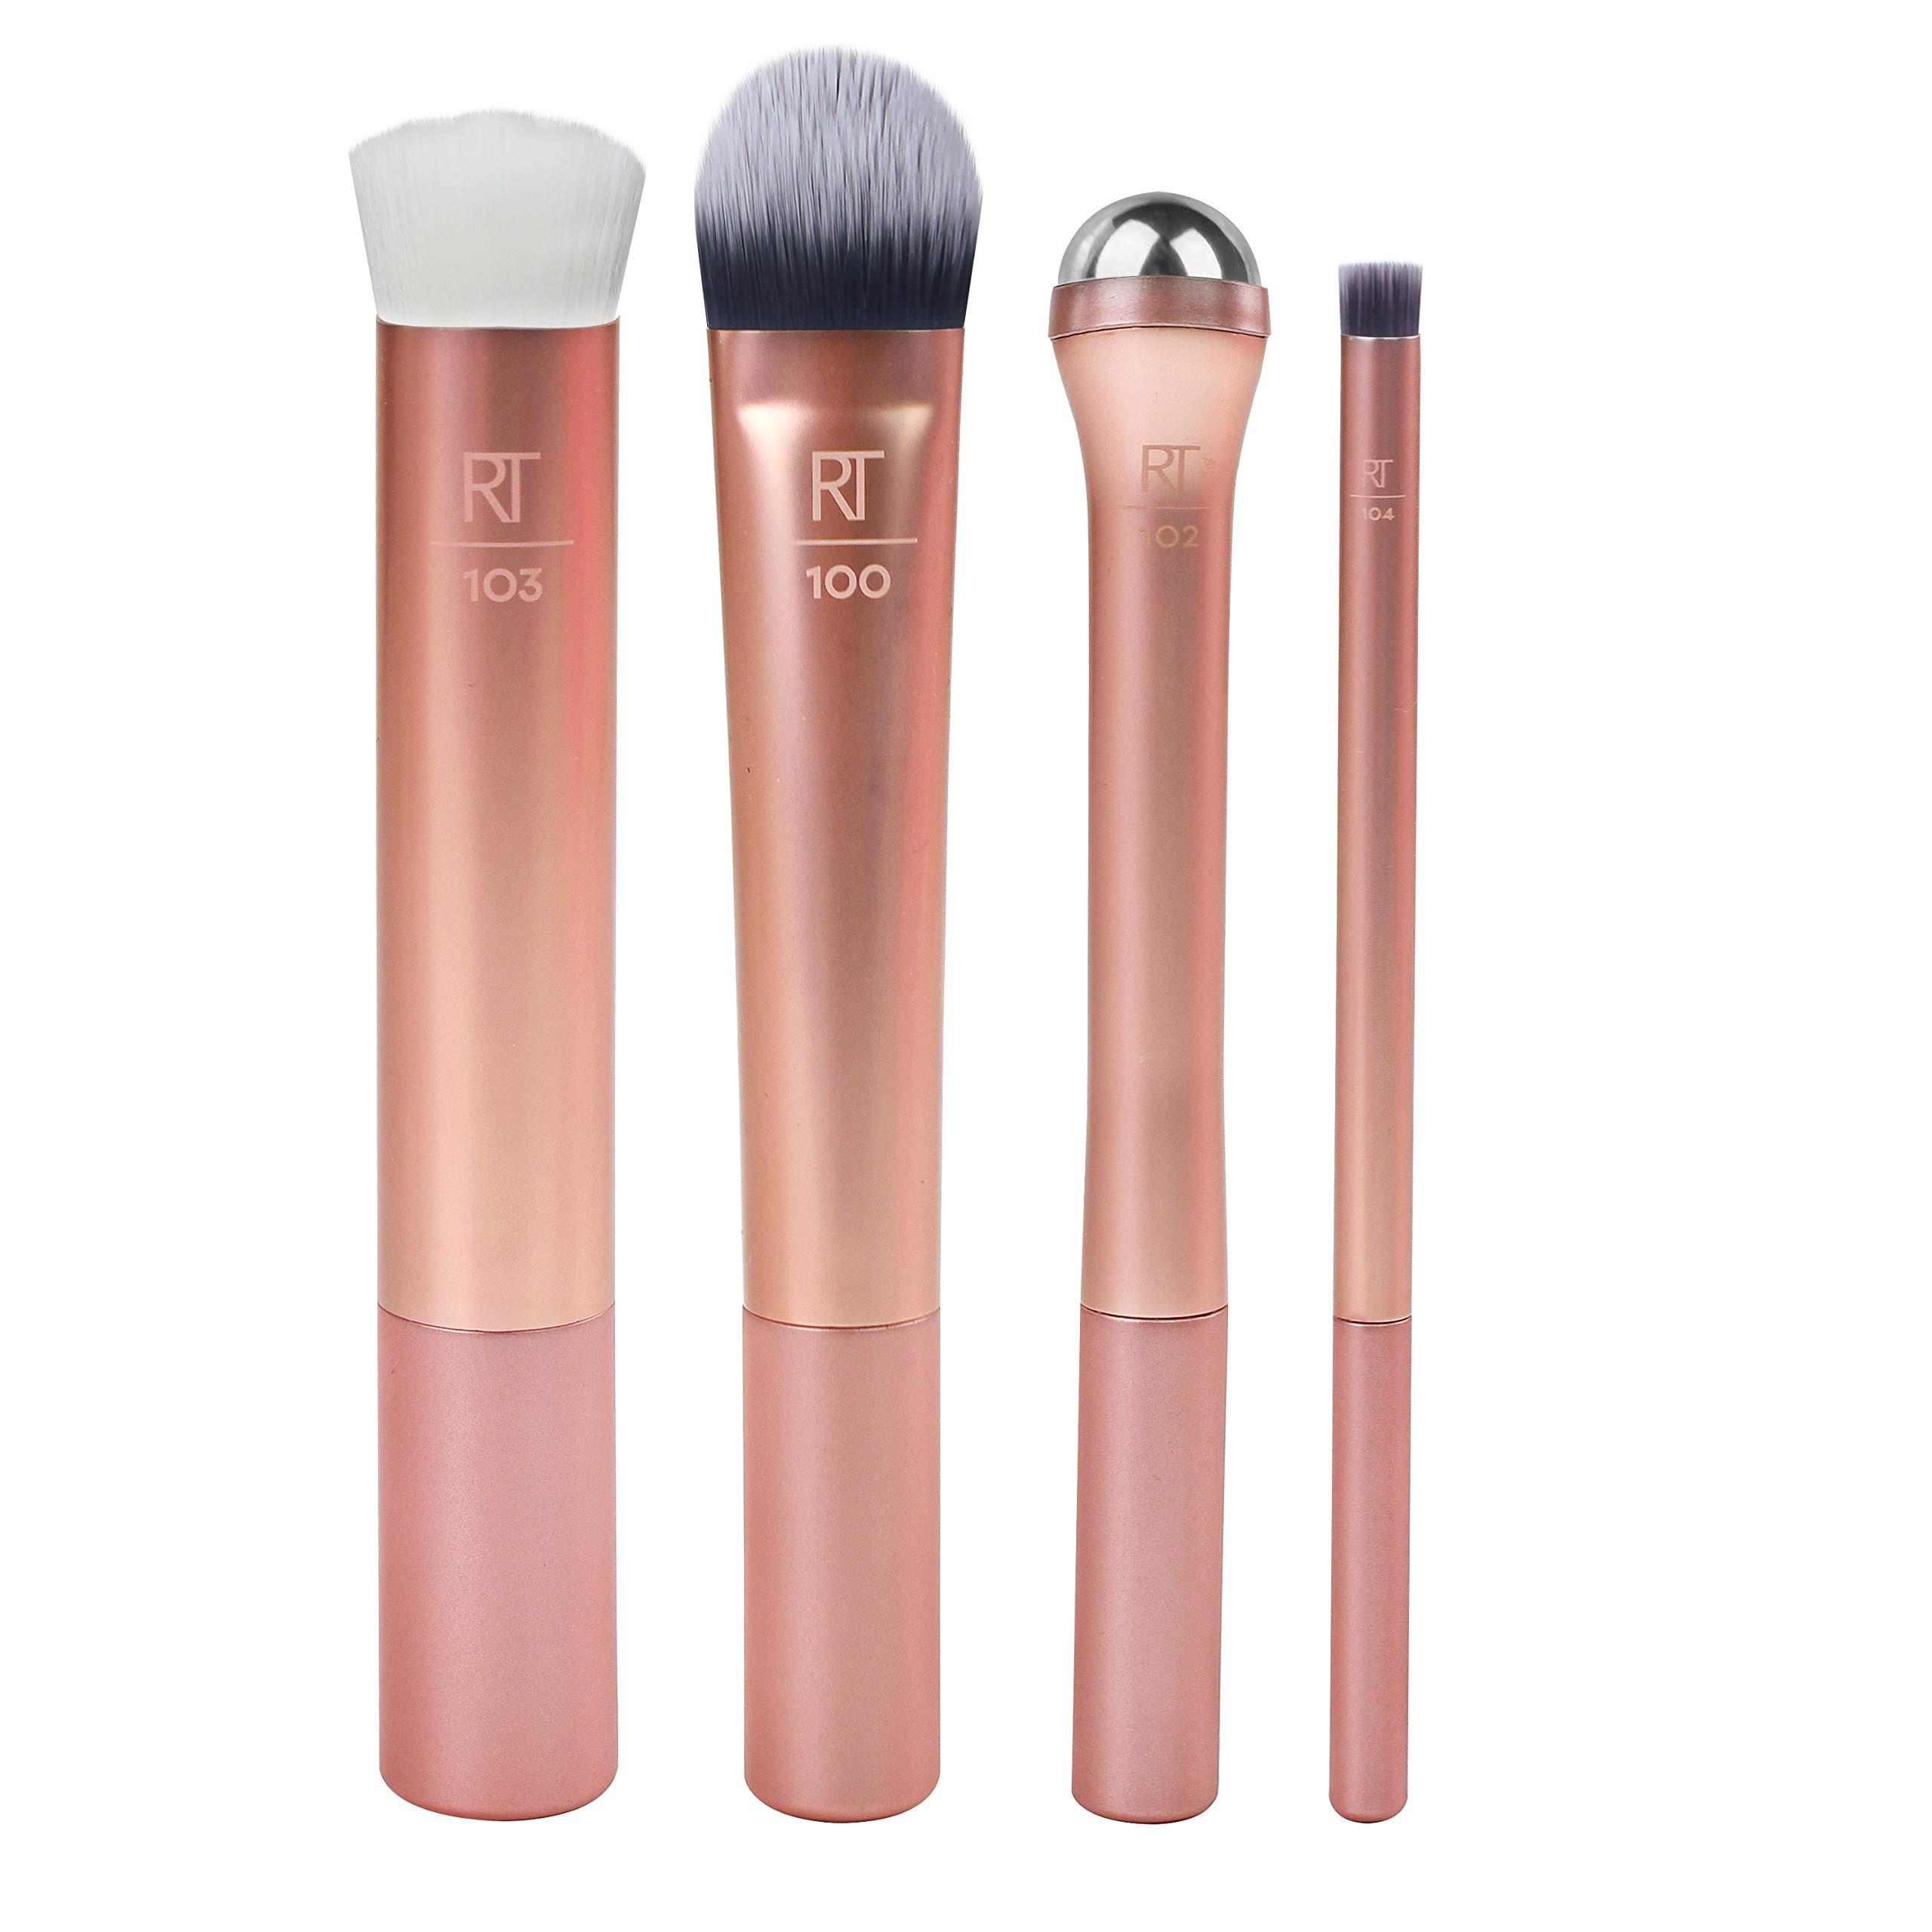 Real Techniques Prep and Prime Makeup Brush Set, Ideal for Exfoliating & Applying Primers, Moisturizers, and Serums, Skincare Tools, Synthetic Bristles, Set of 4